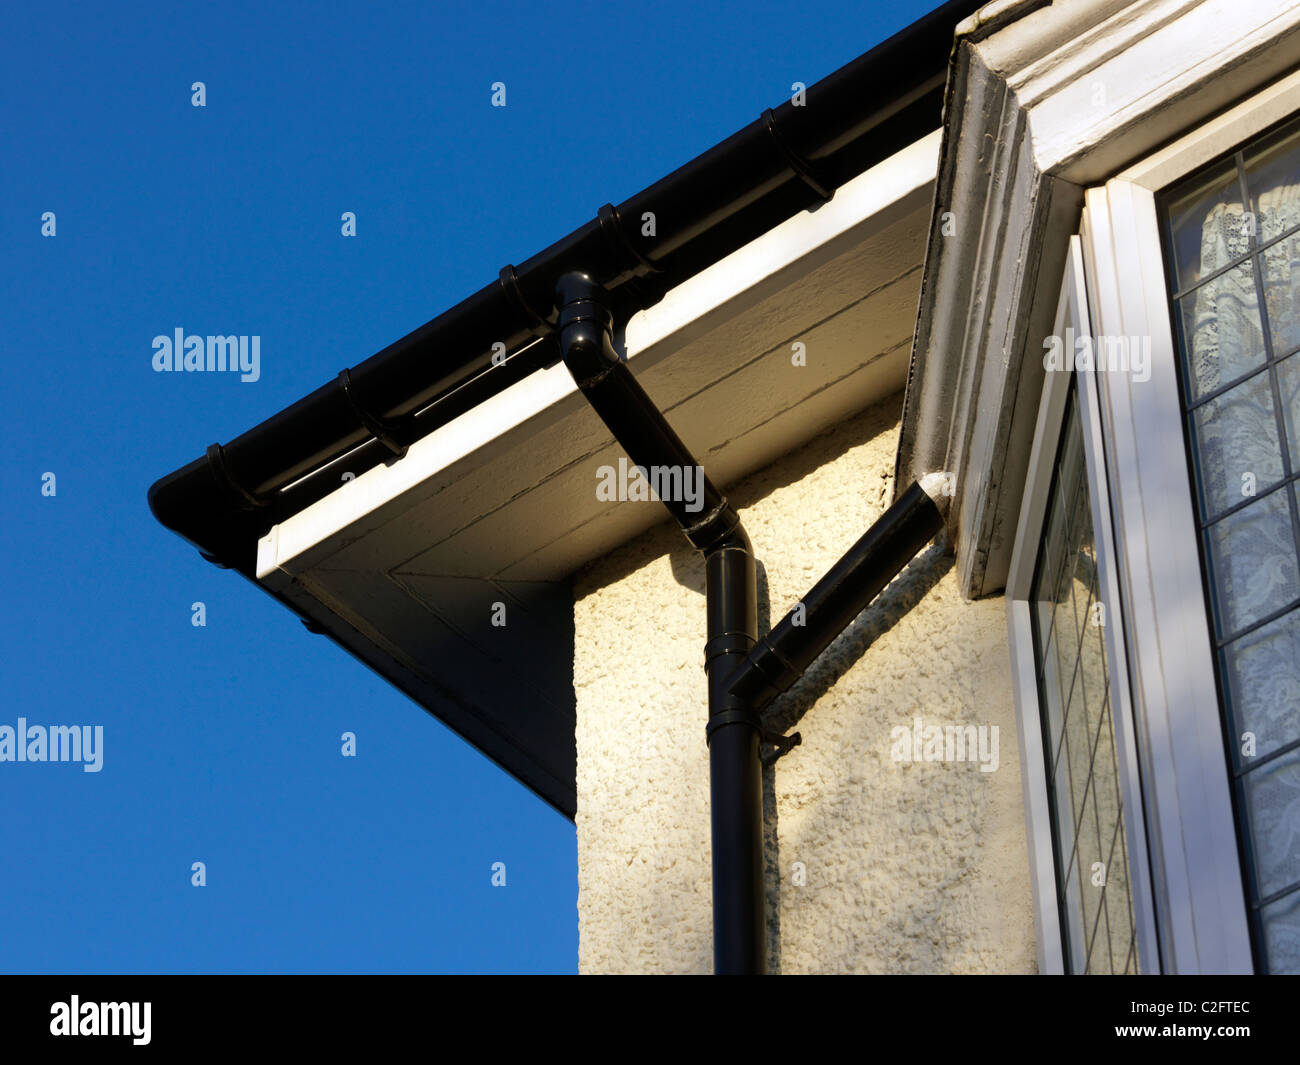 Gutter, Support Brackets, Offset Bend And Downpipe On The Side Of A House Stock Photo